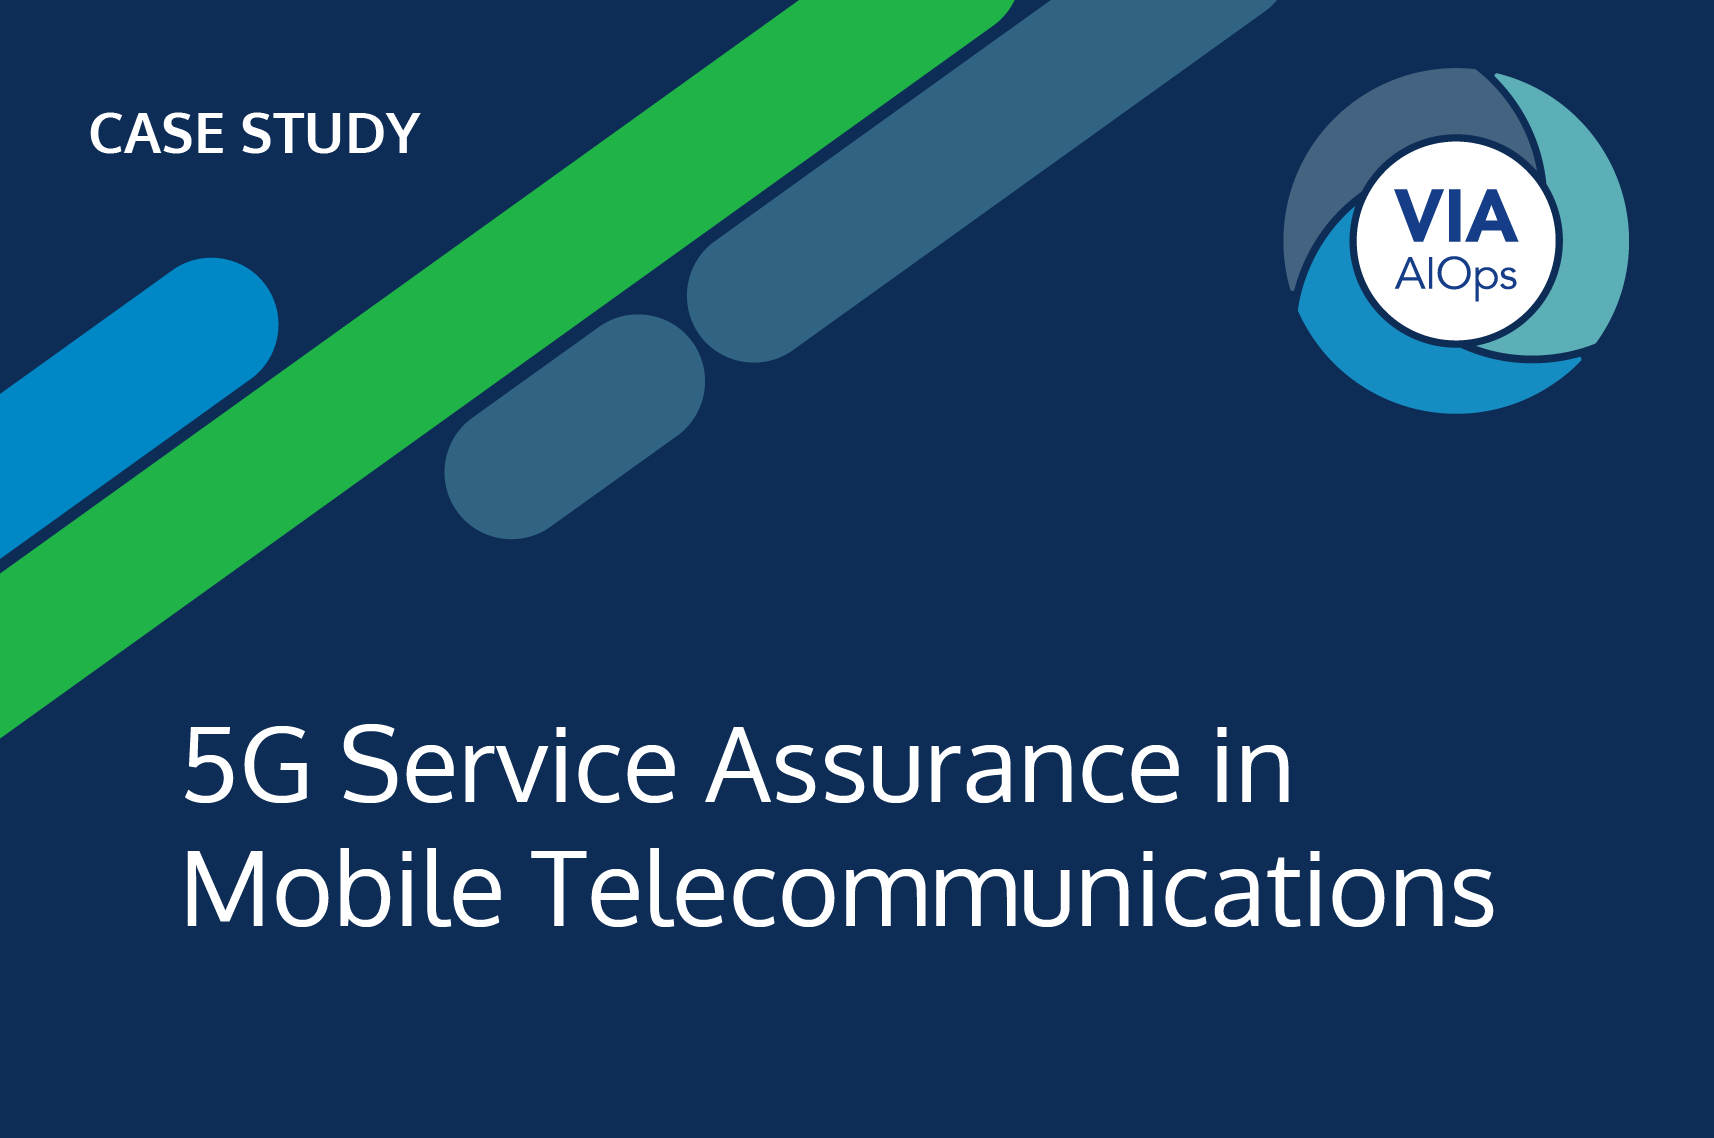 5G Service Assurance in Mobile Telecommunications